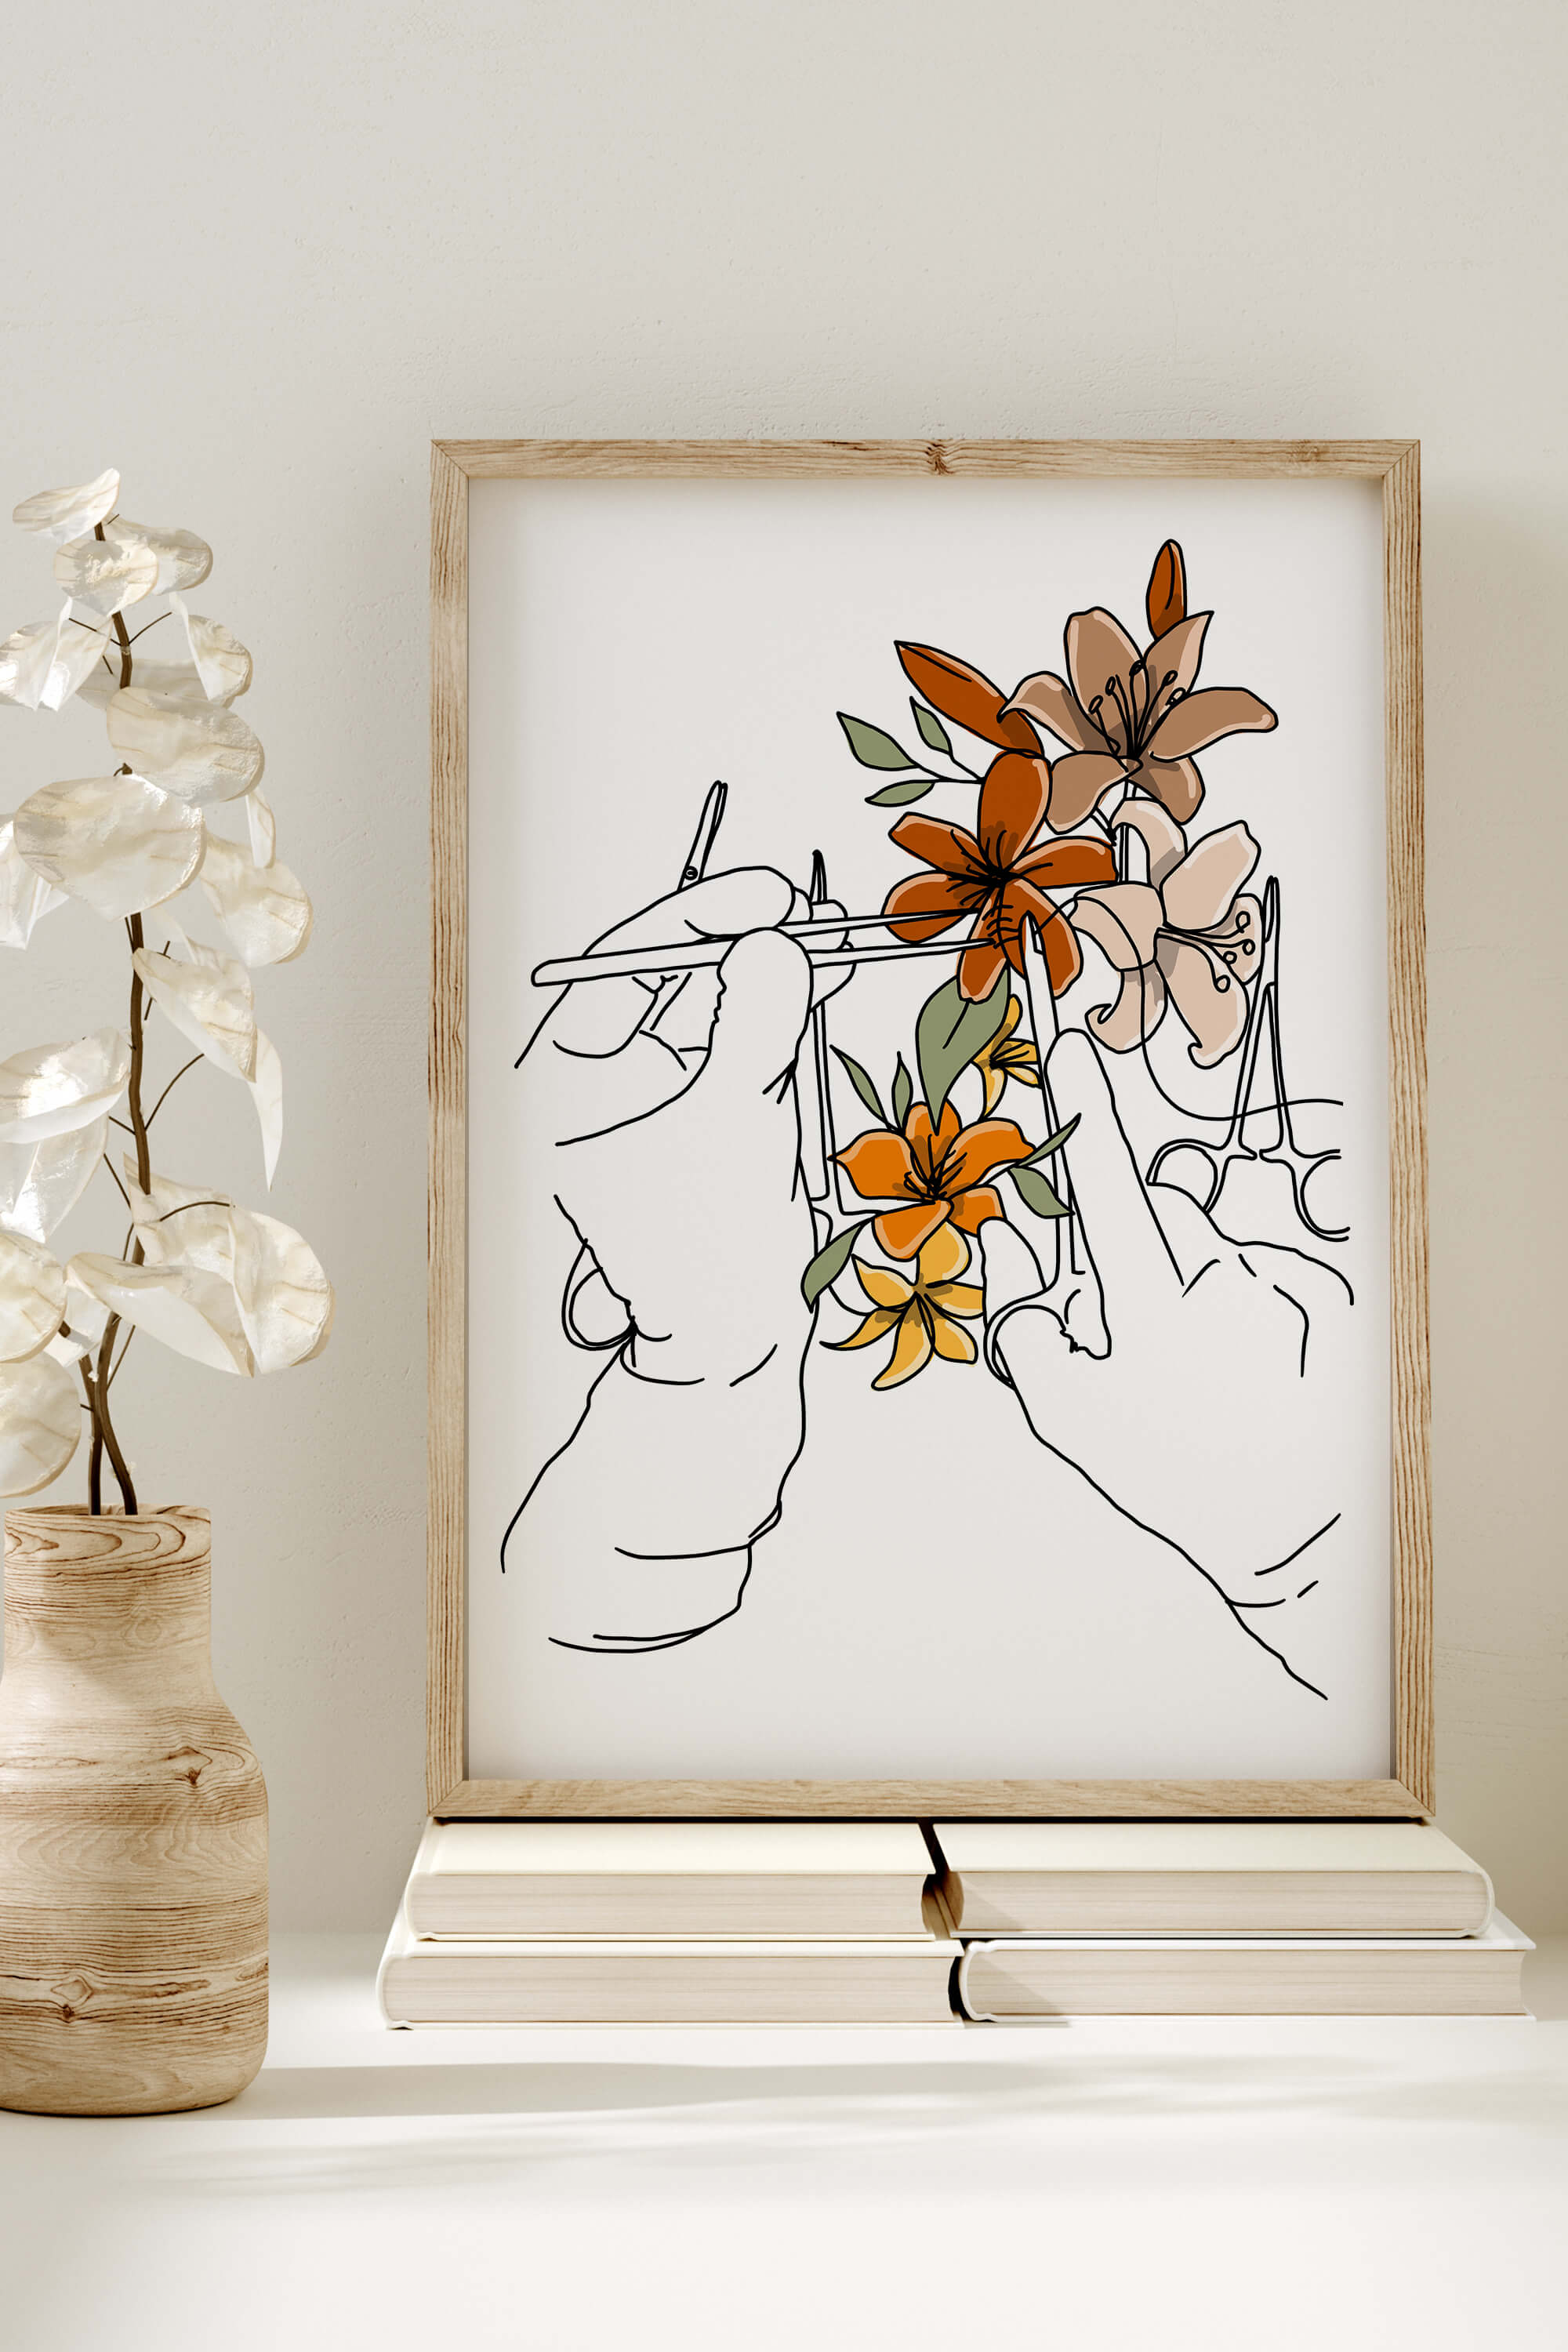 A thoughtful gift for doctors and surgeons, this floral surgery poster is not just a decoration but a gesture of appreciation. Ideal for graduations, office decor, or any setting where the dedication of medical professionals deserves acknowledgment.